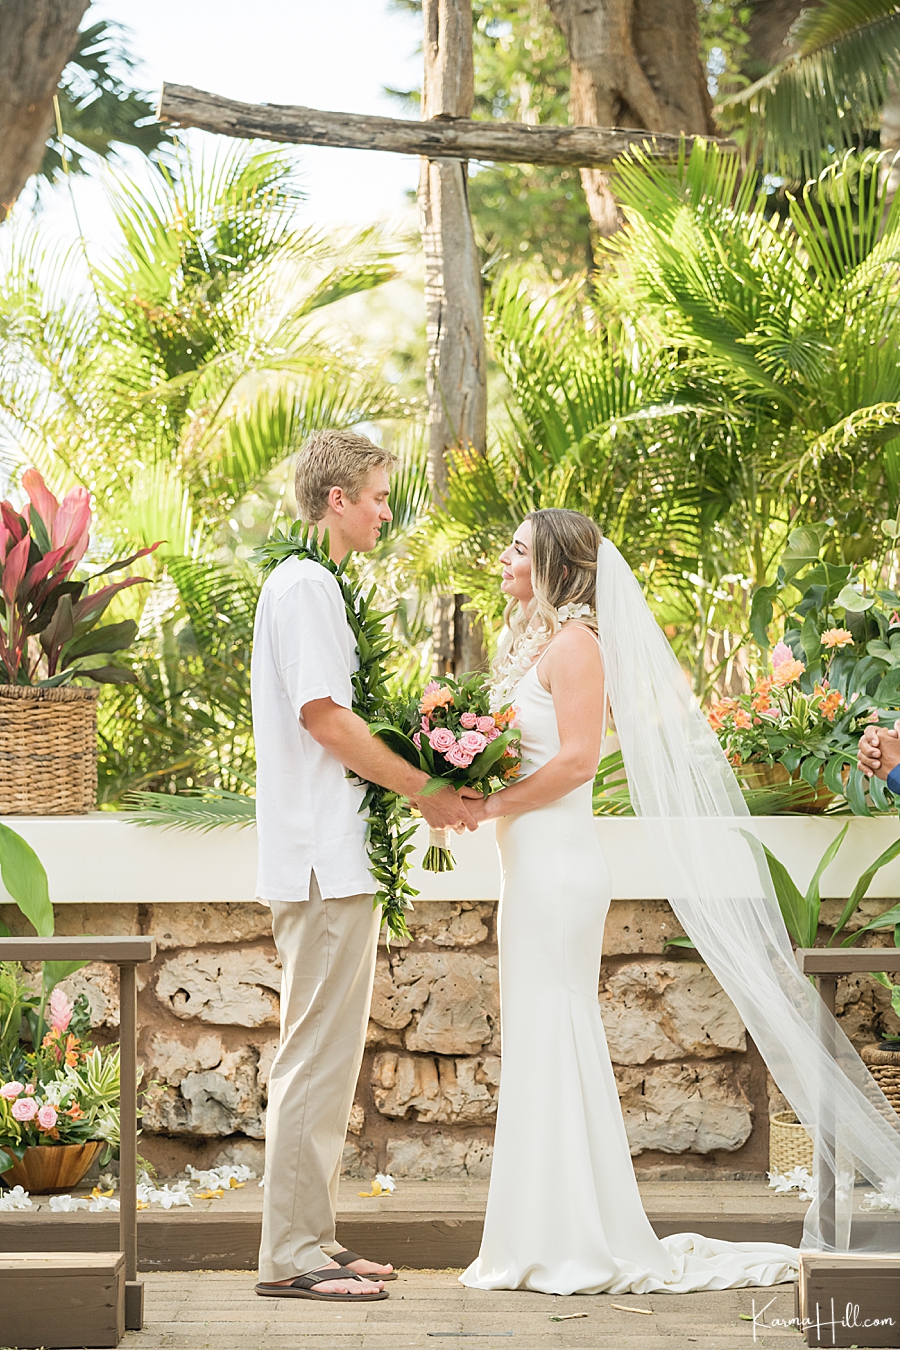 Cool and shady location for a wedding in Maui